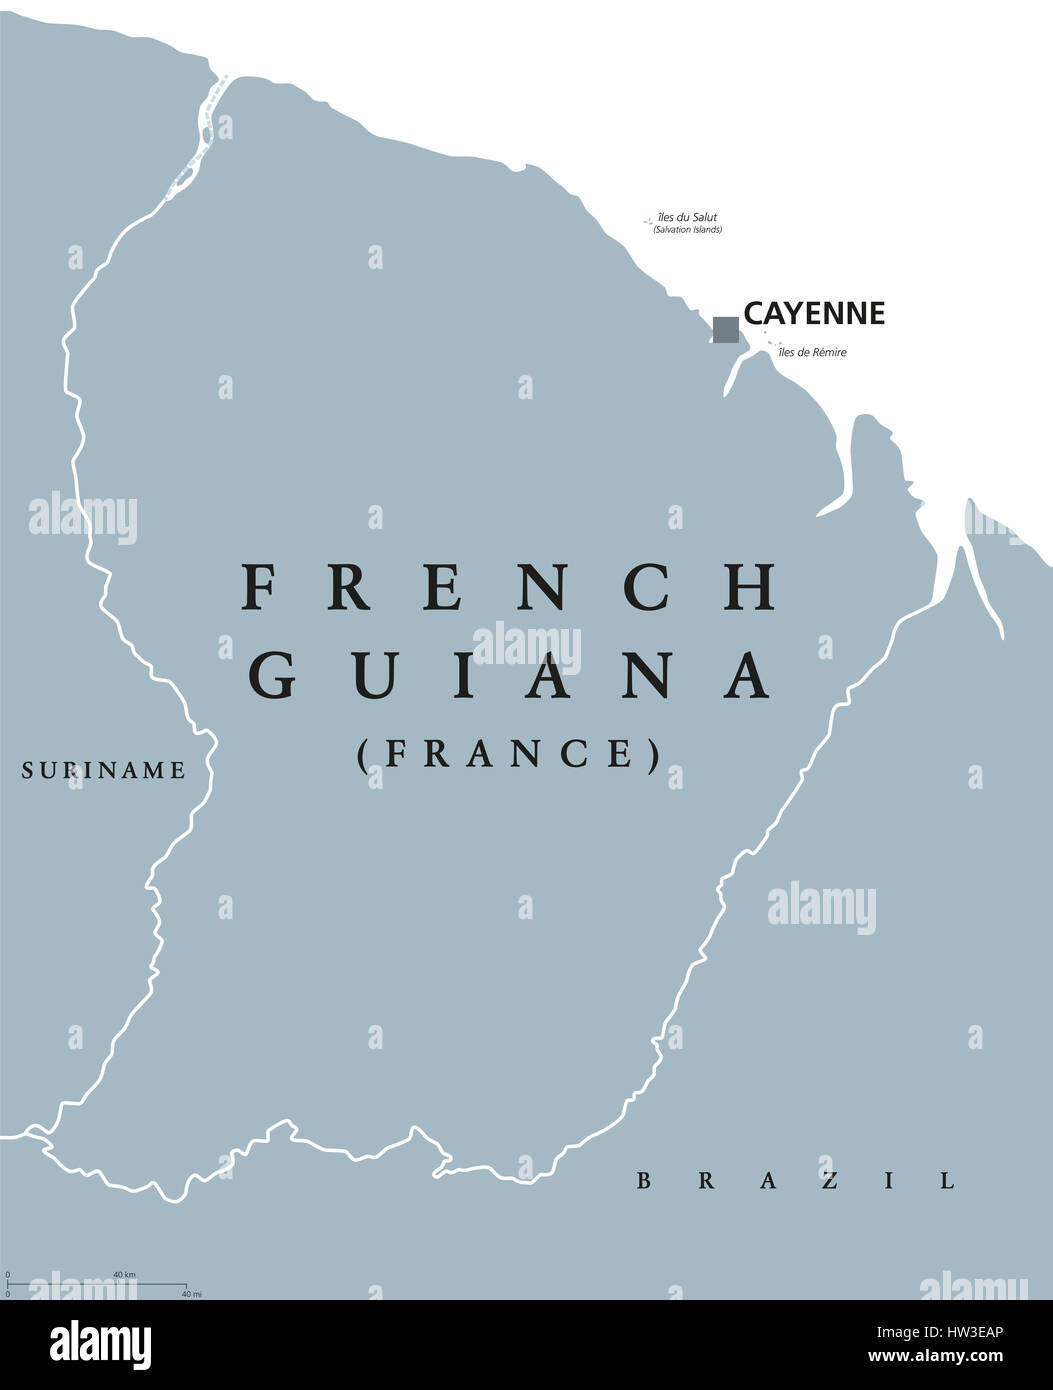 French Guiana political map with capital Cayenne and borders. Overseas department and region of France, located in South America. Gray illustration. Stock Photo